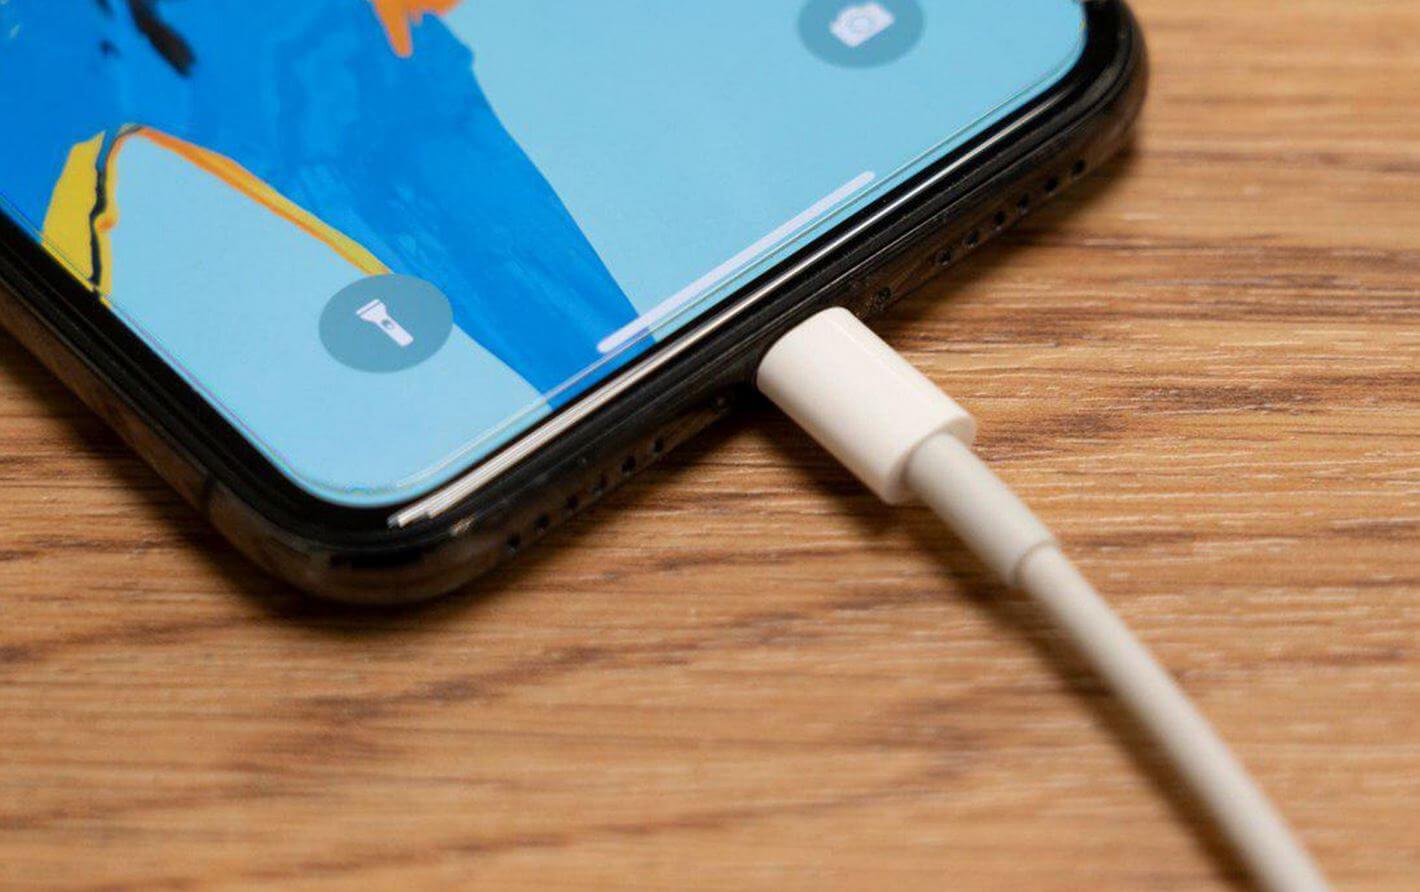 How to Make iPhone Charge Faster